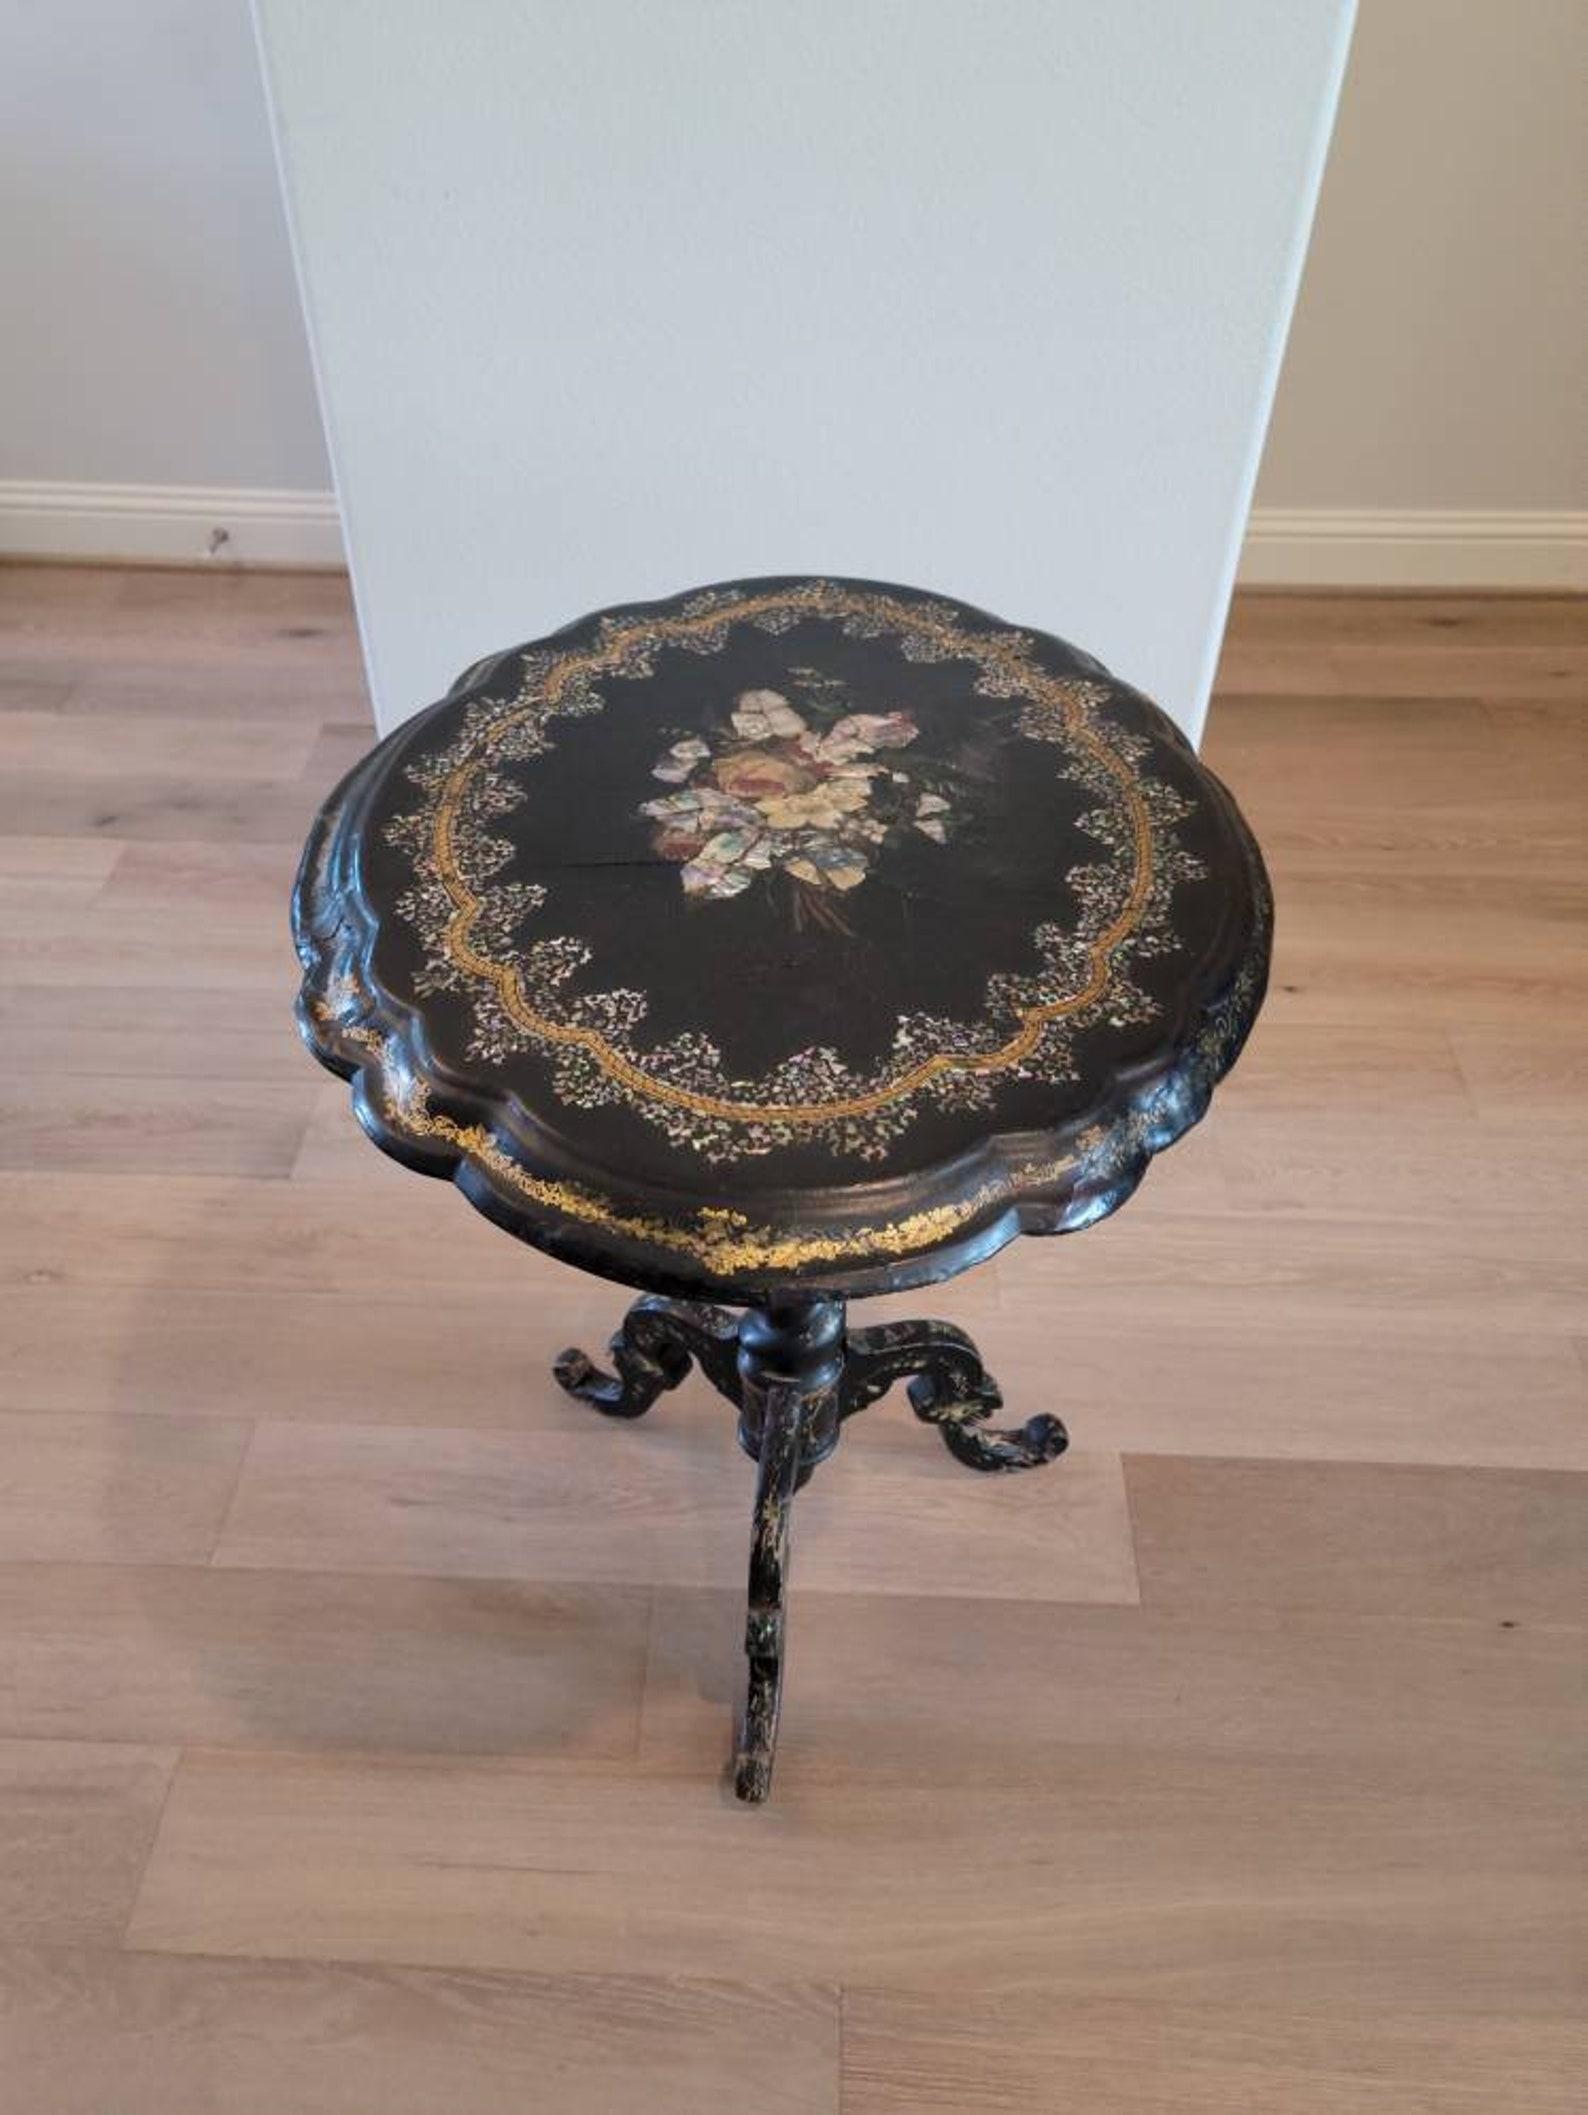 A stunning antique English Victorian papier mâché flip-top parlor table in the manner of Jennens and Bettridge (1816–1870)

Born in the mid-19th century, Chinoiserie taste, profusely decorated including hand painted polychrome floral decoration,